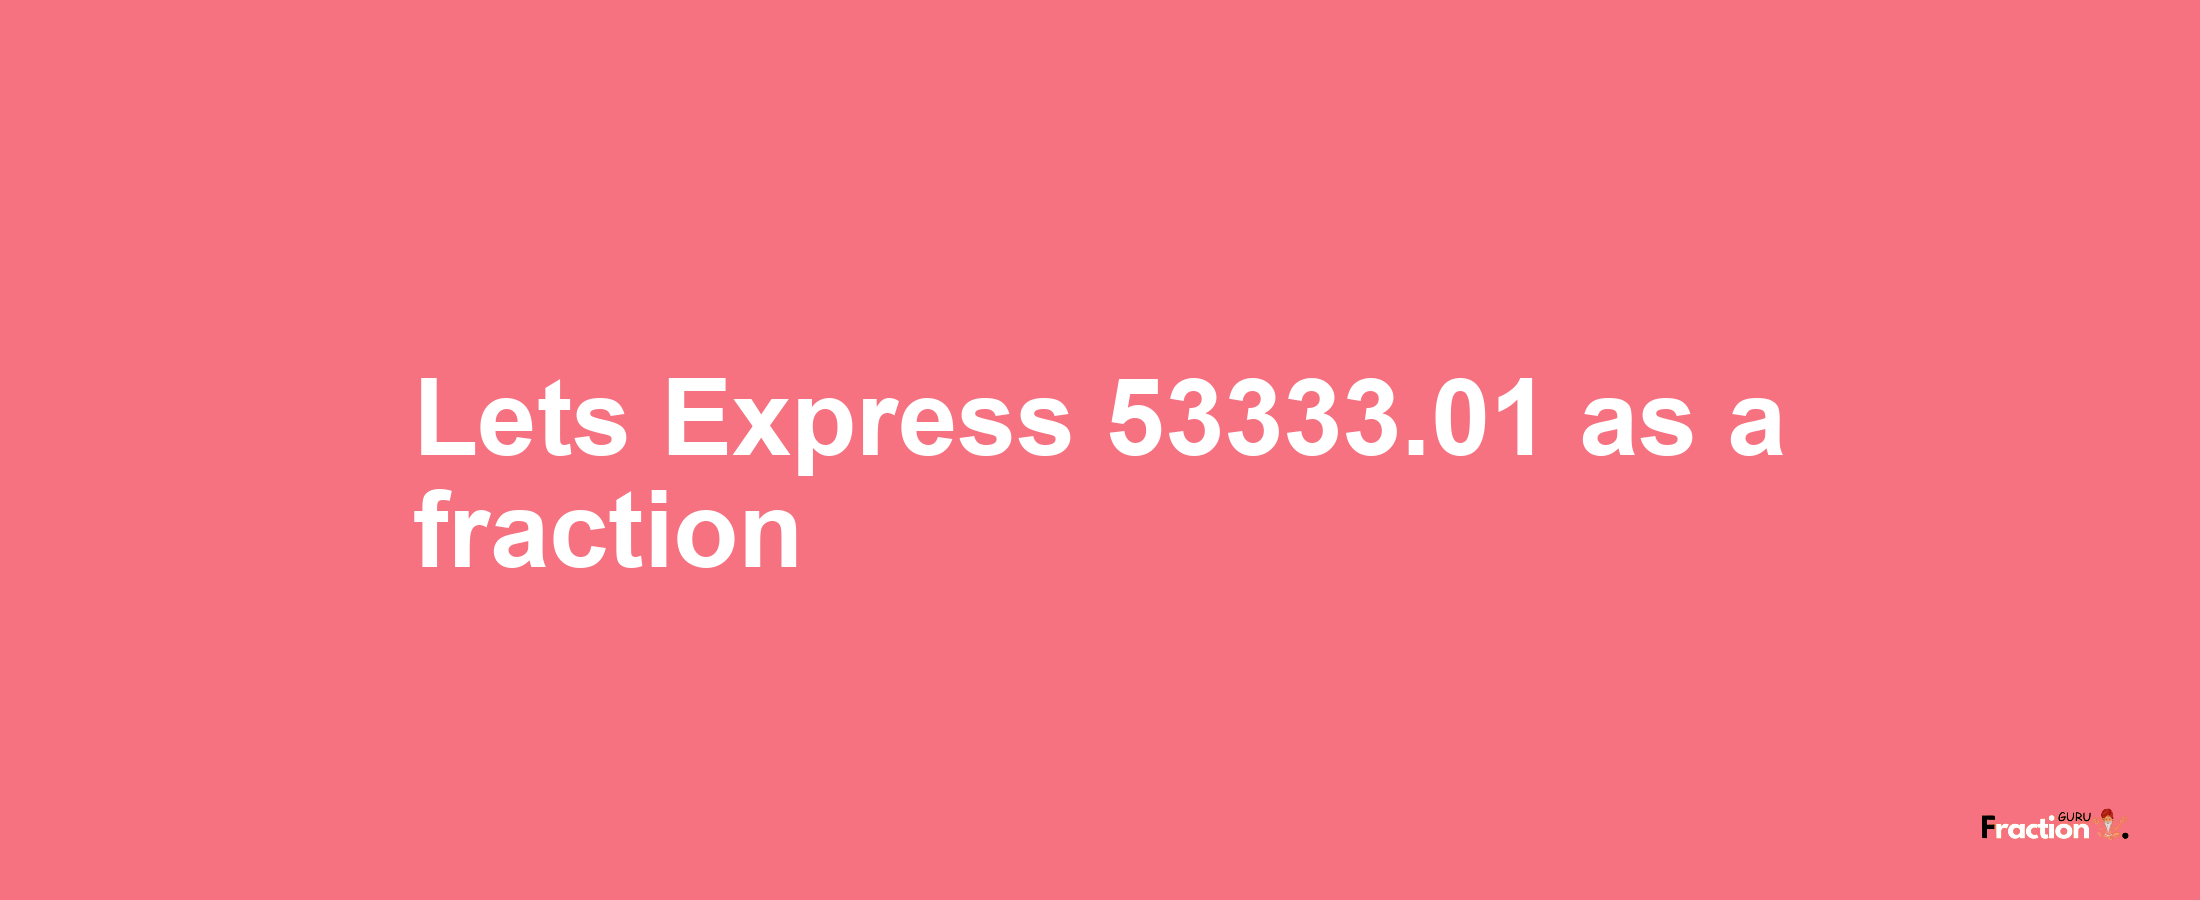 Lets Express 53333.01 as afraction